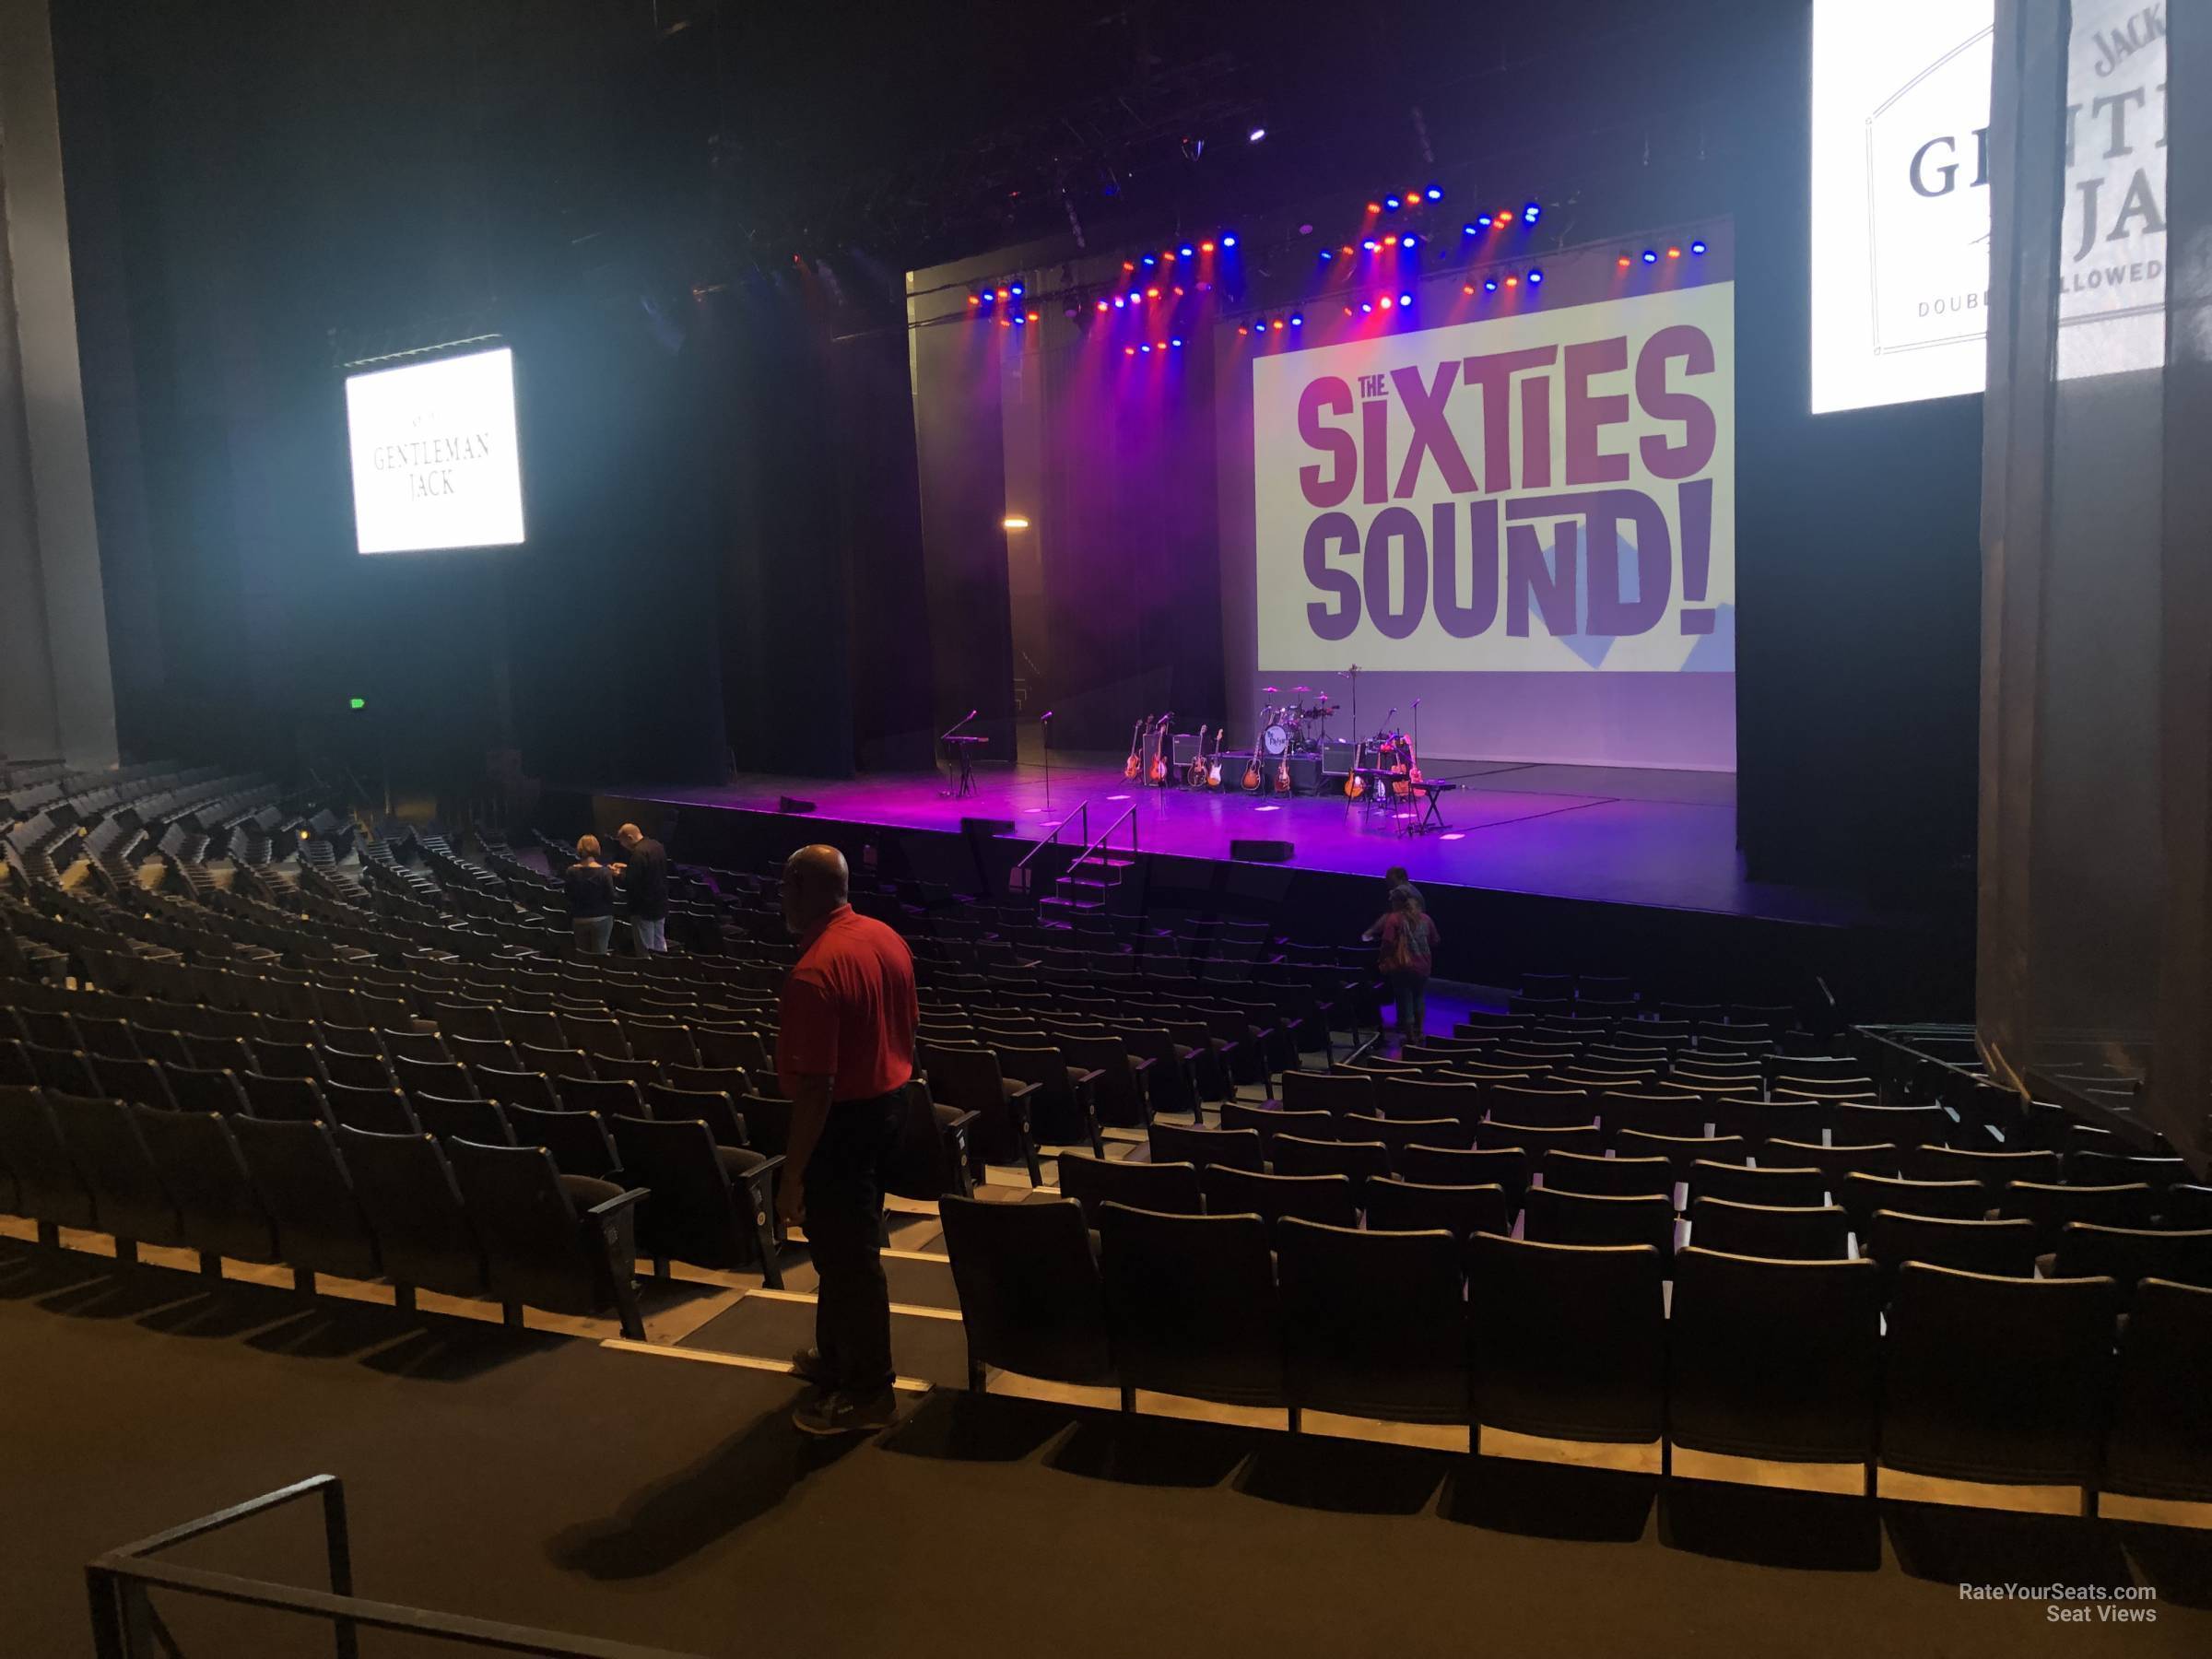 section 202, row cc seat view  - texas trust cu theatre